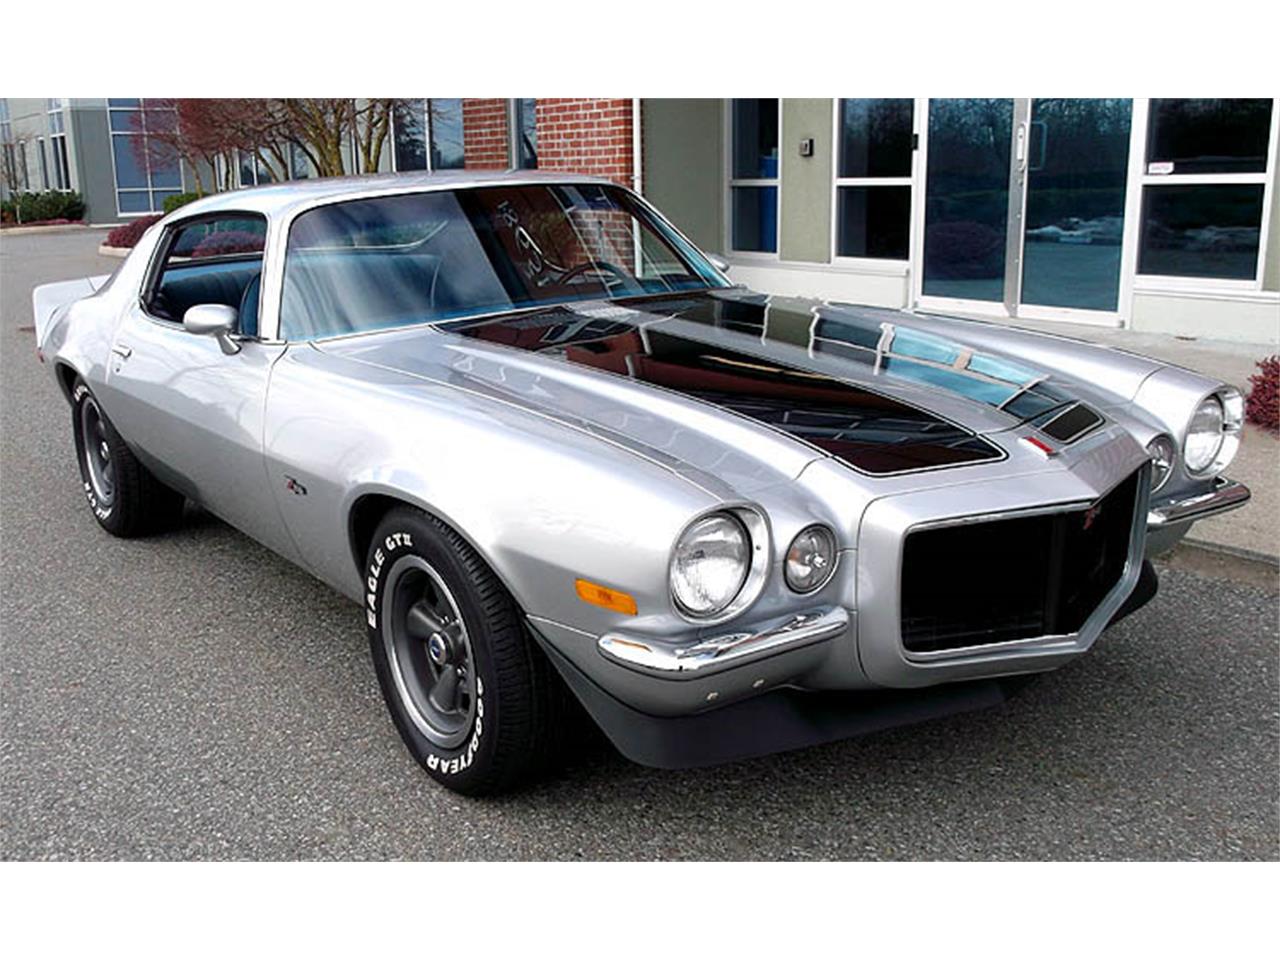 For Sale: 1971 Chevrolet Camaro RS Z28 in Vancouver, British Columbia.